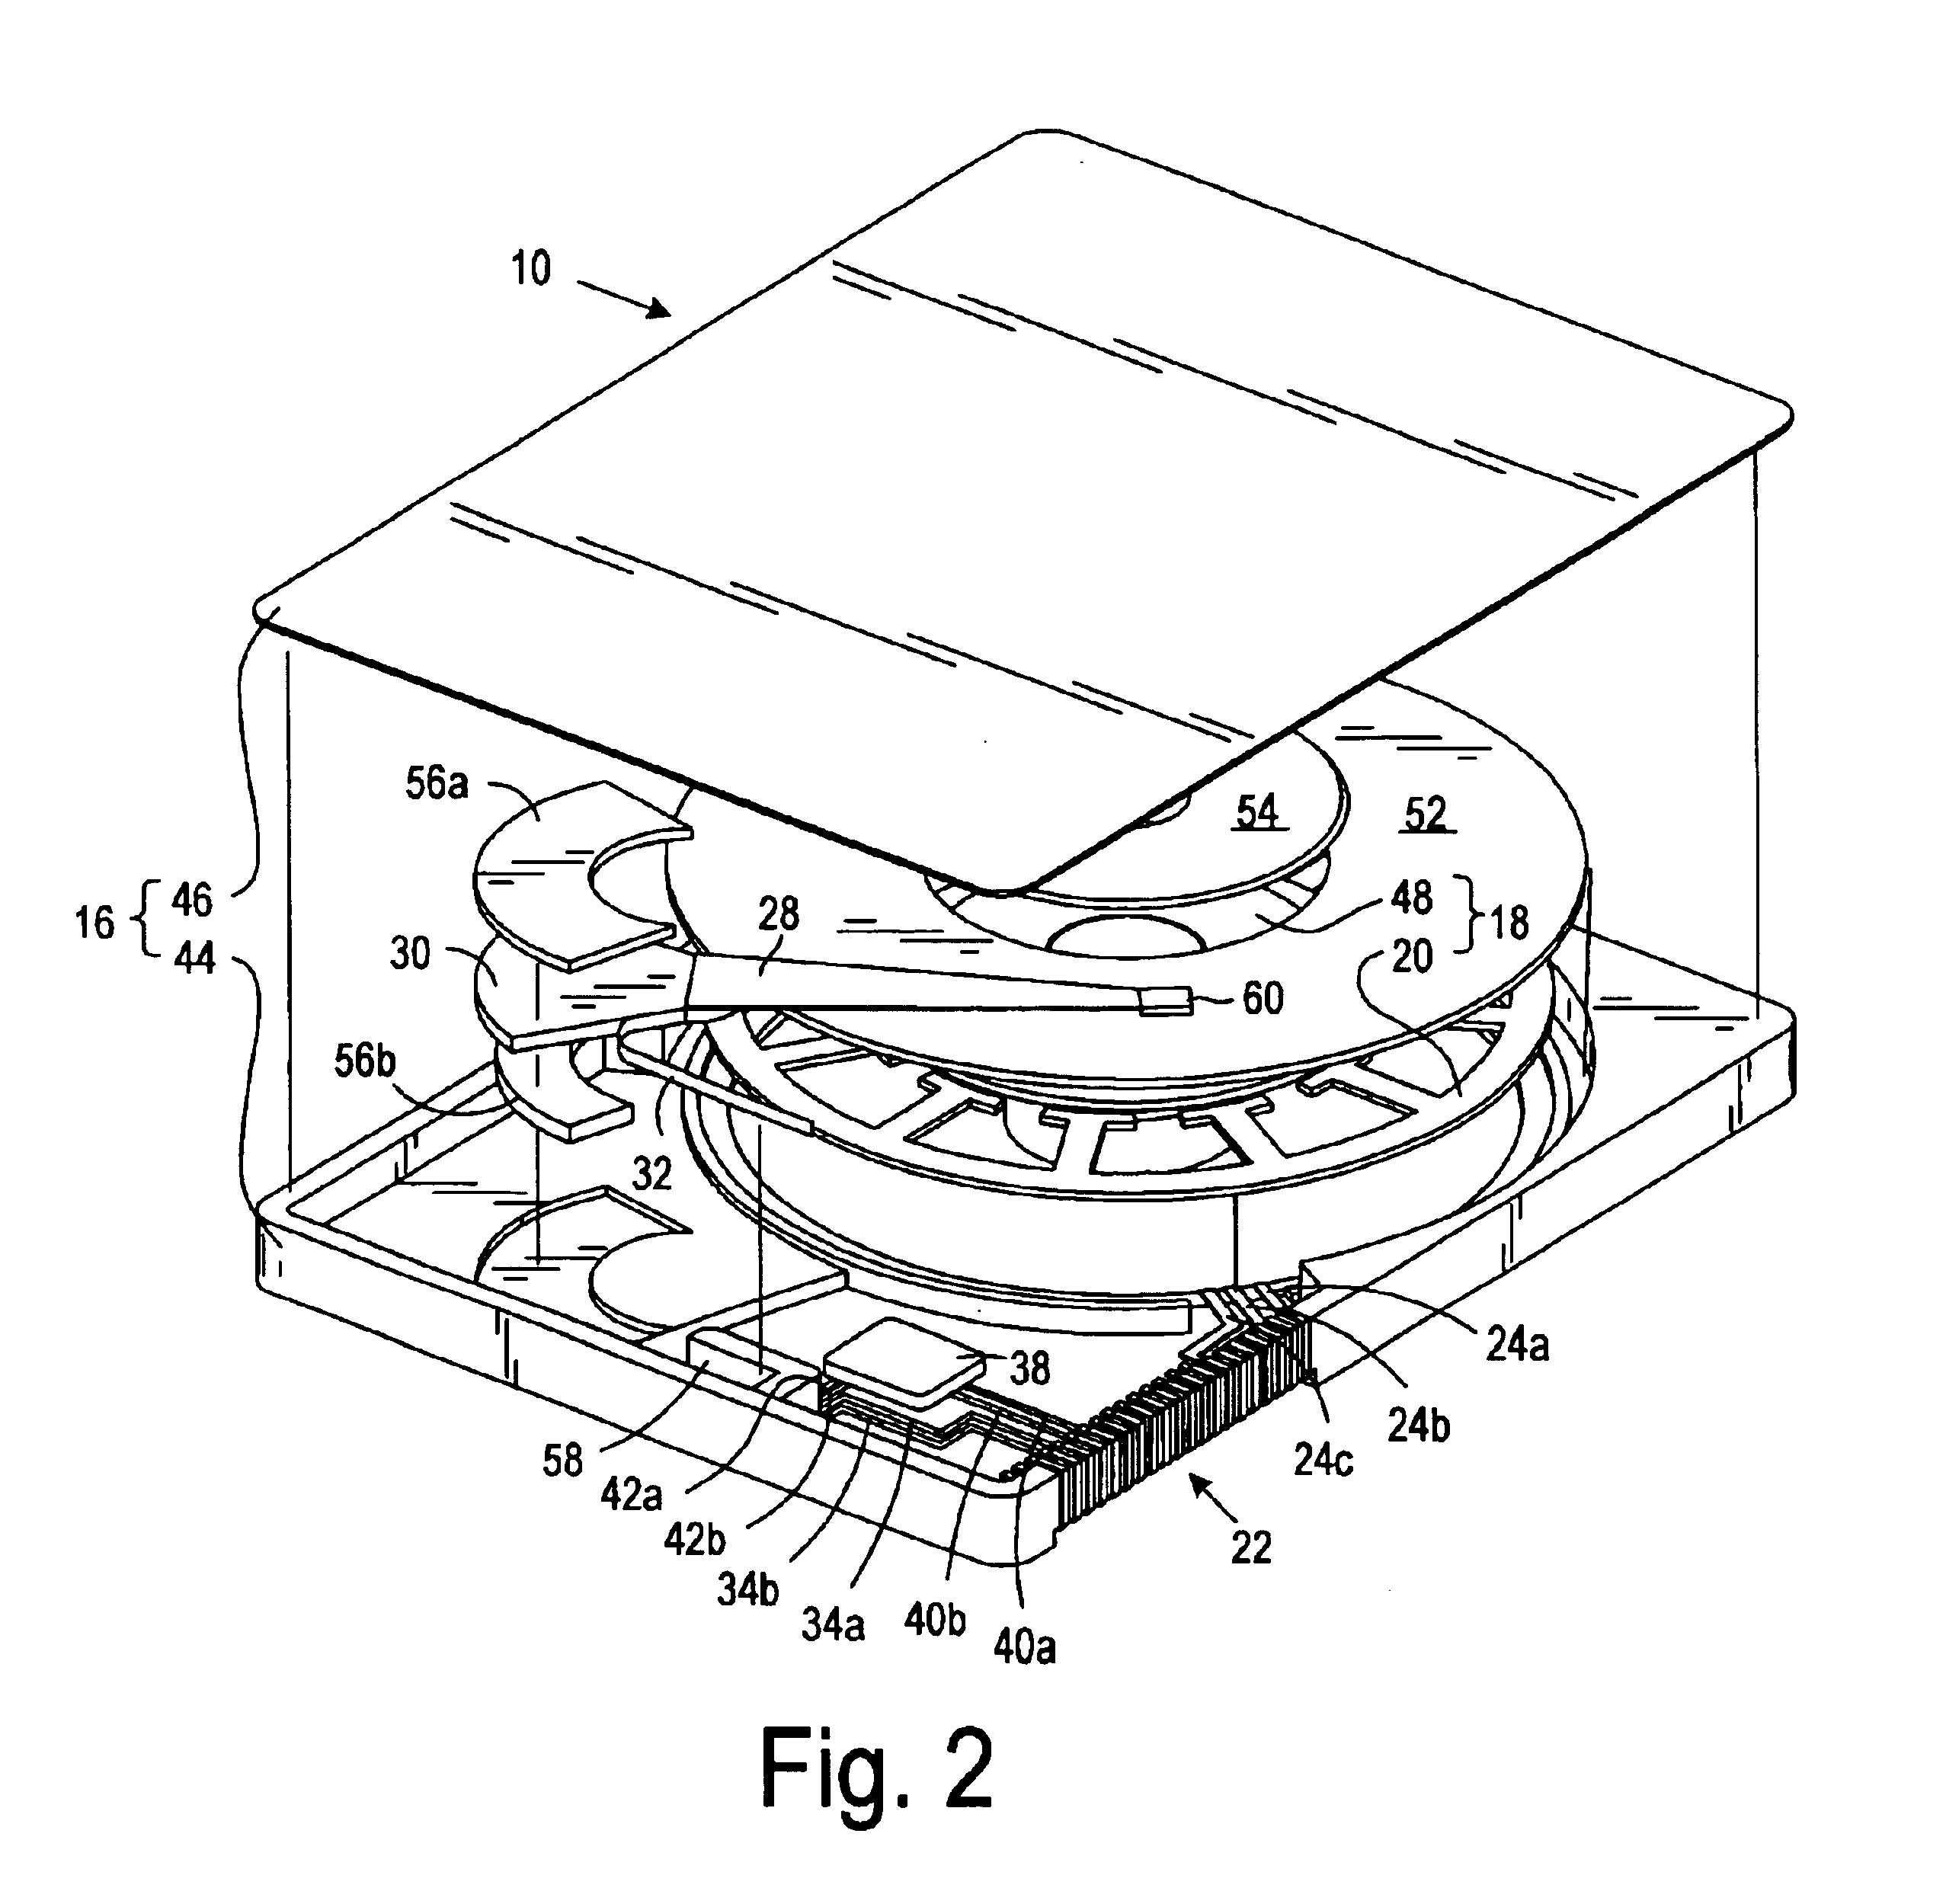 Disk drive including electrical traces integrally formed upon disk drive housing